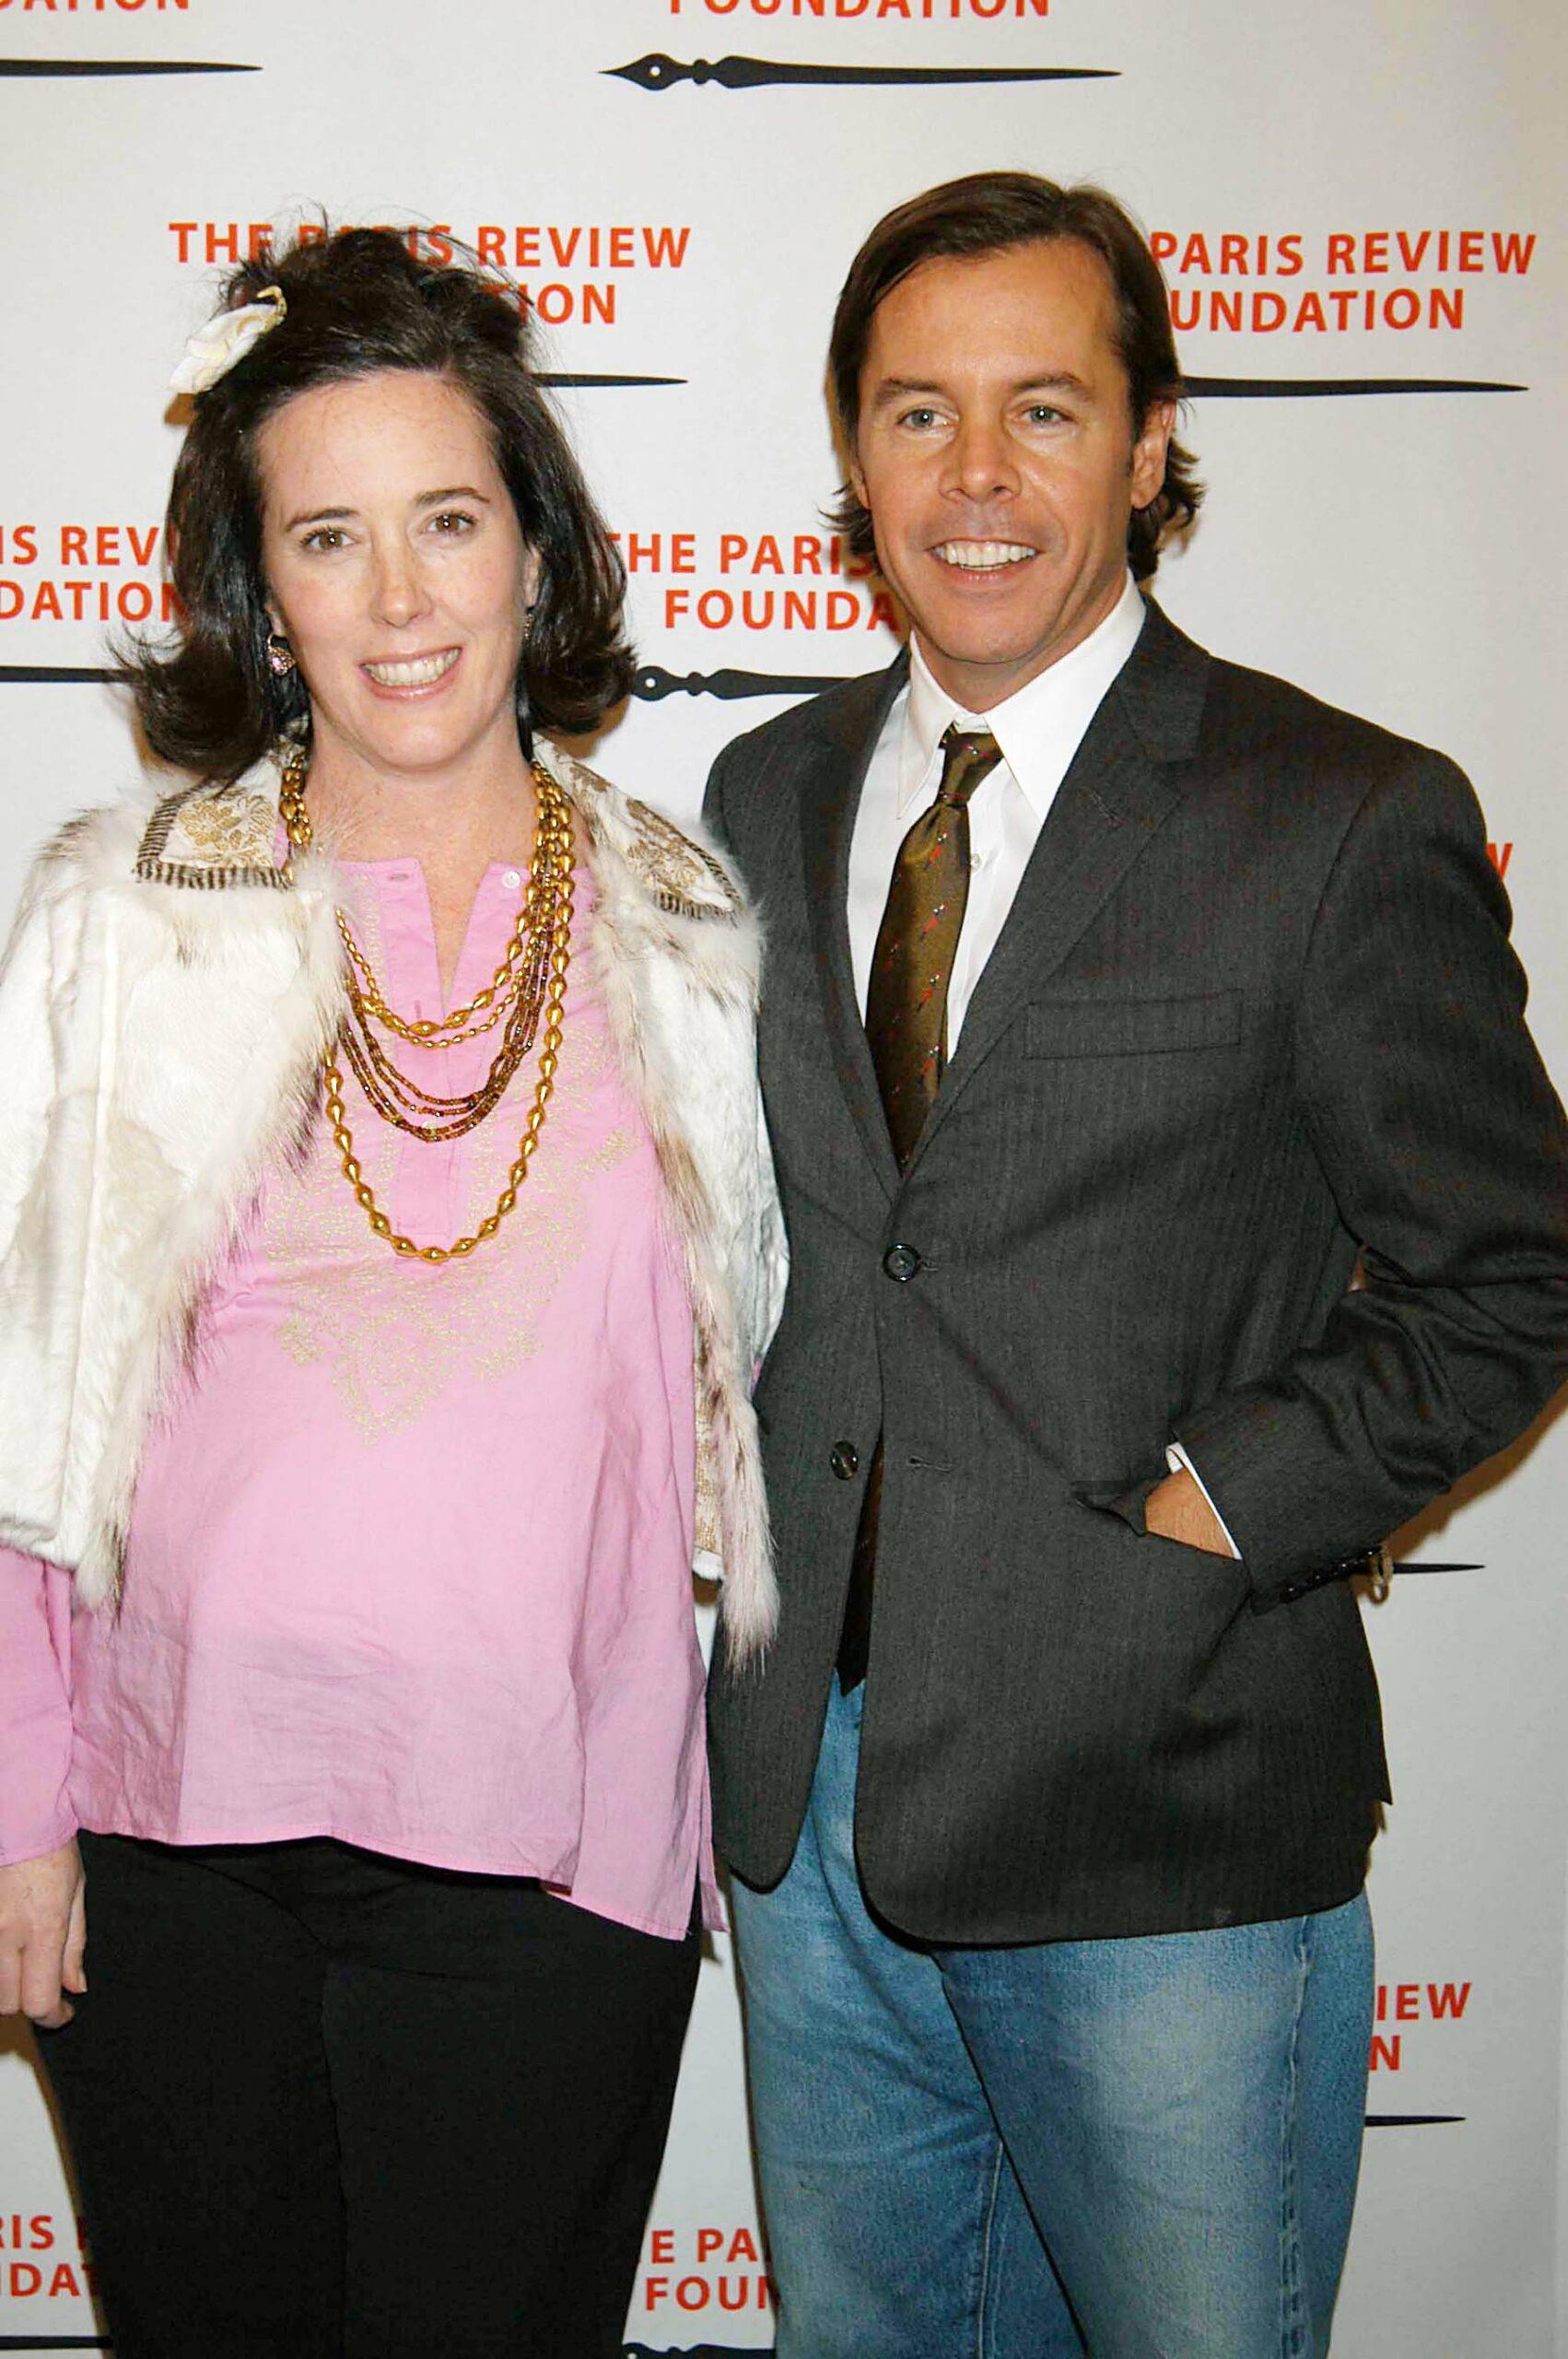 KATE and ANDY SPADE attend the Paris Review Foundation Presents, Fall Revel Honoring William Styron At Cipriani. 11 Nov 2004 Pictured: KATE and ANDY SPADE attend the Paris Review Foundation Presents, Fall Revel Honoring William Styron At Cipriani. Photo credit: ZUMAPRESS.com / MEGA TheMegaAgency.com +1 888 505 6342 (Mega Agency TagID: MEGA234608_003.jpg) [Photo via Mega Agency]